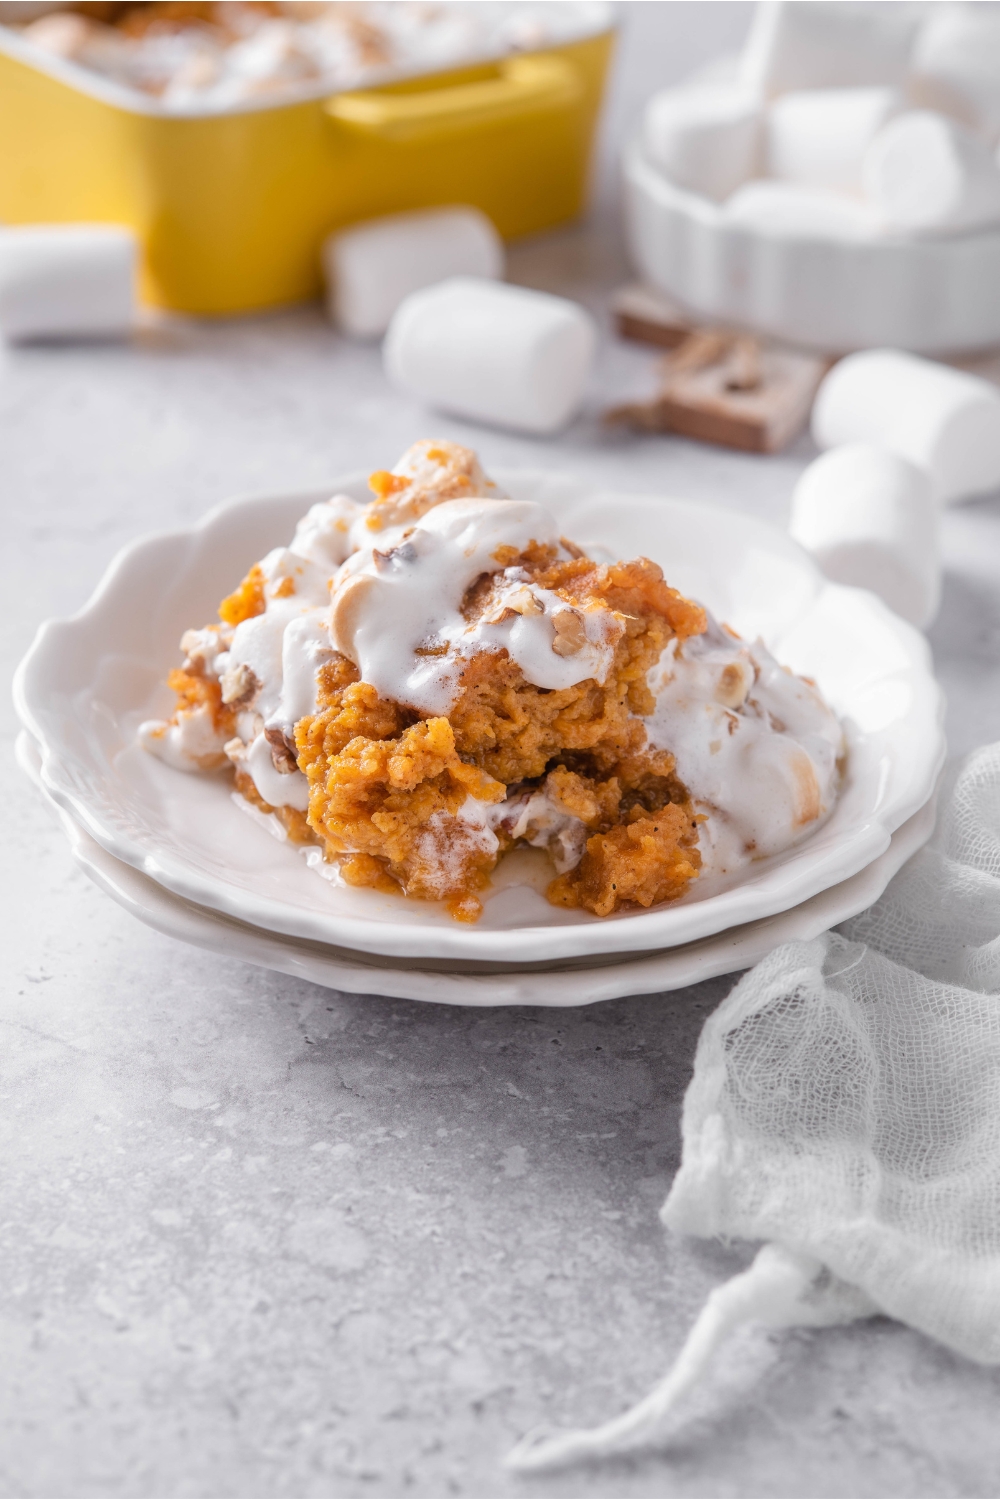 A serving of sweet potato casserole on two white plates with marshmallows melting on top of the casserole.